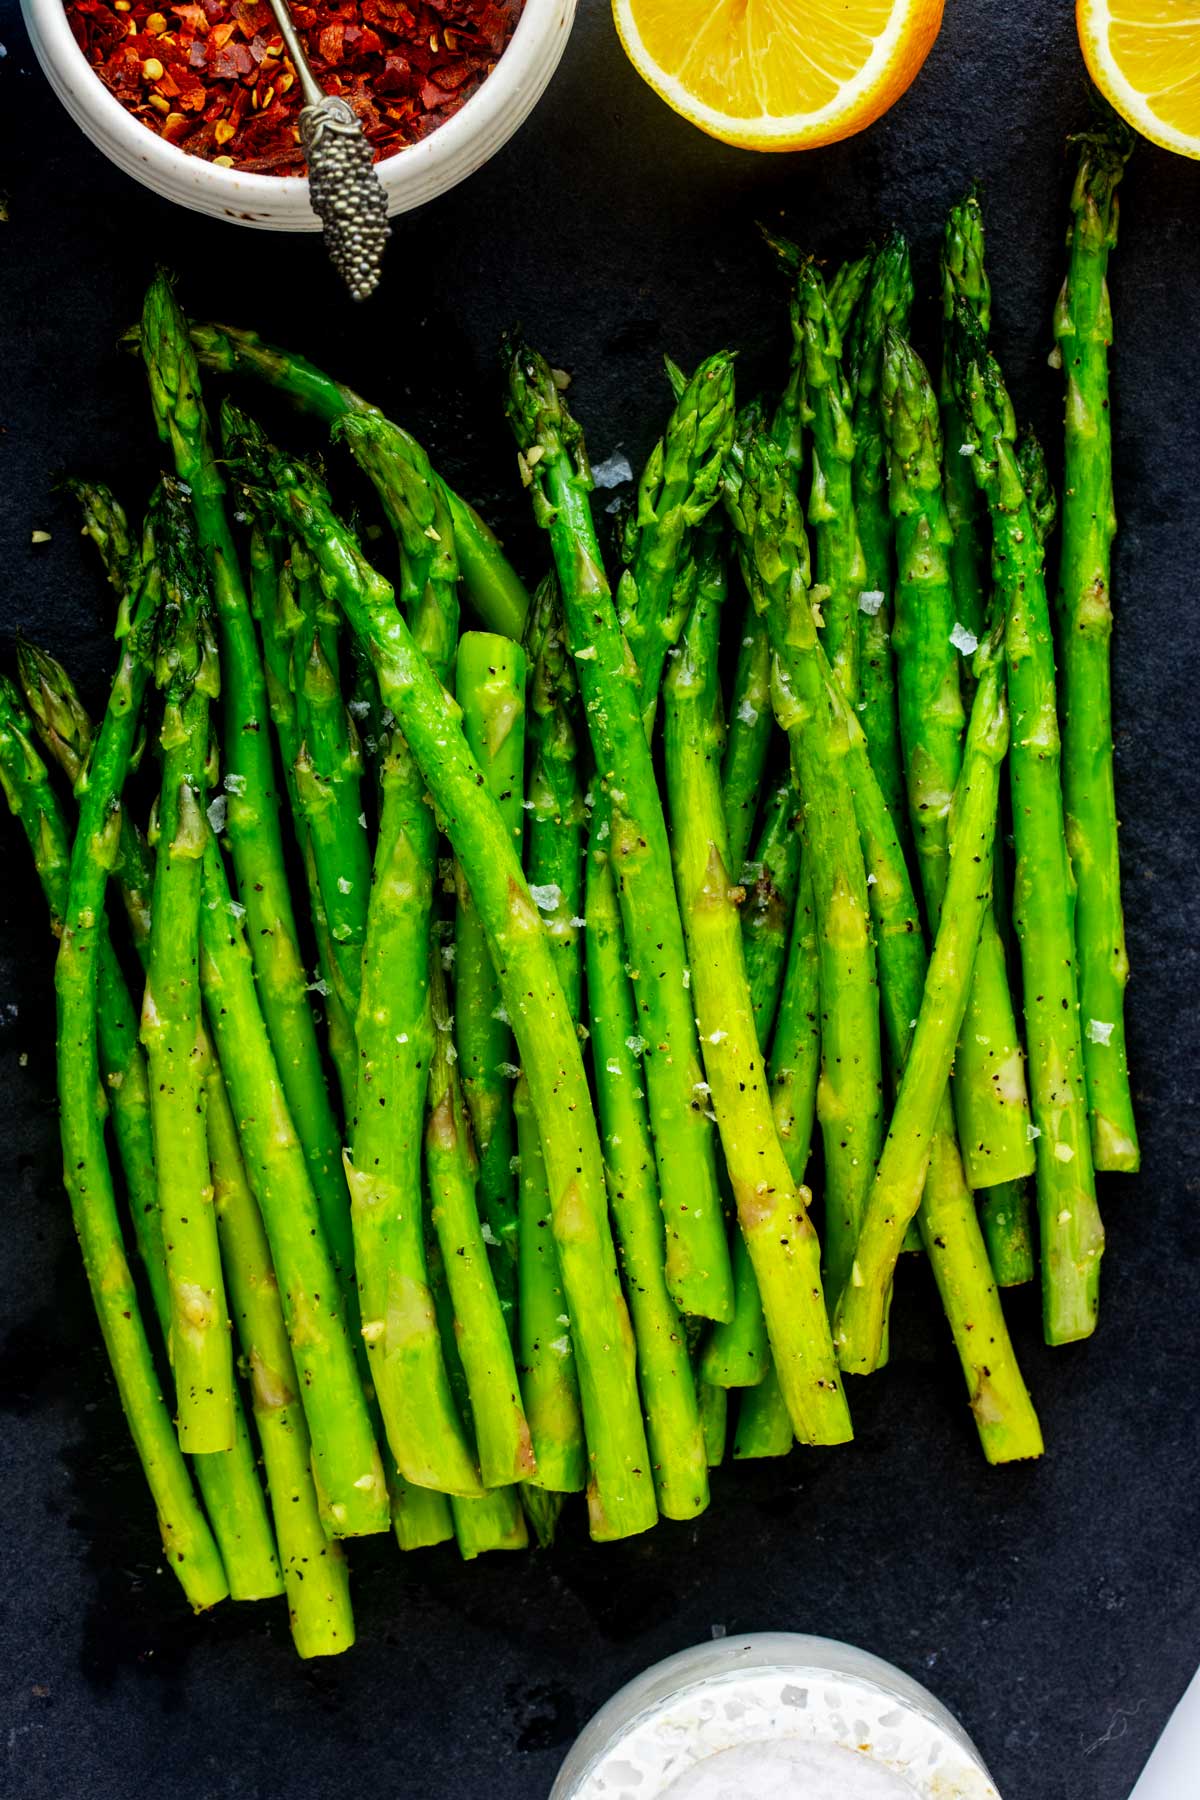 Air fryer asparagus just removed from the air fryer and placed on a slate board.